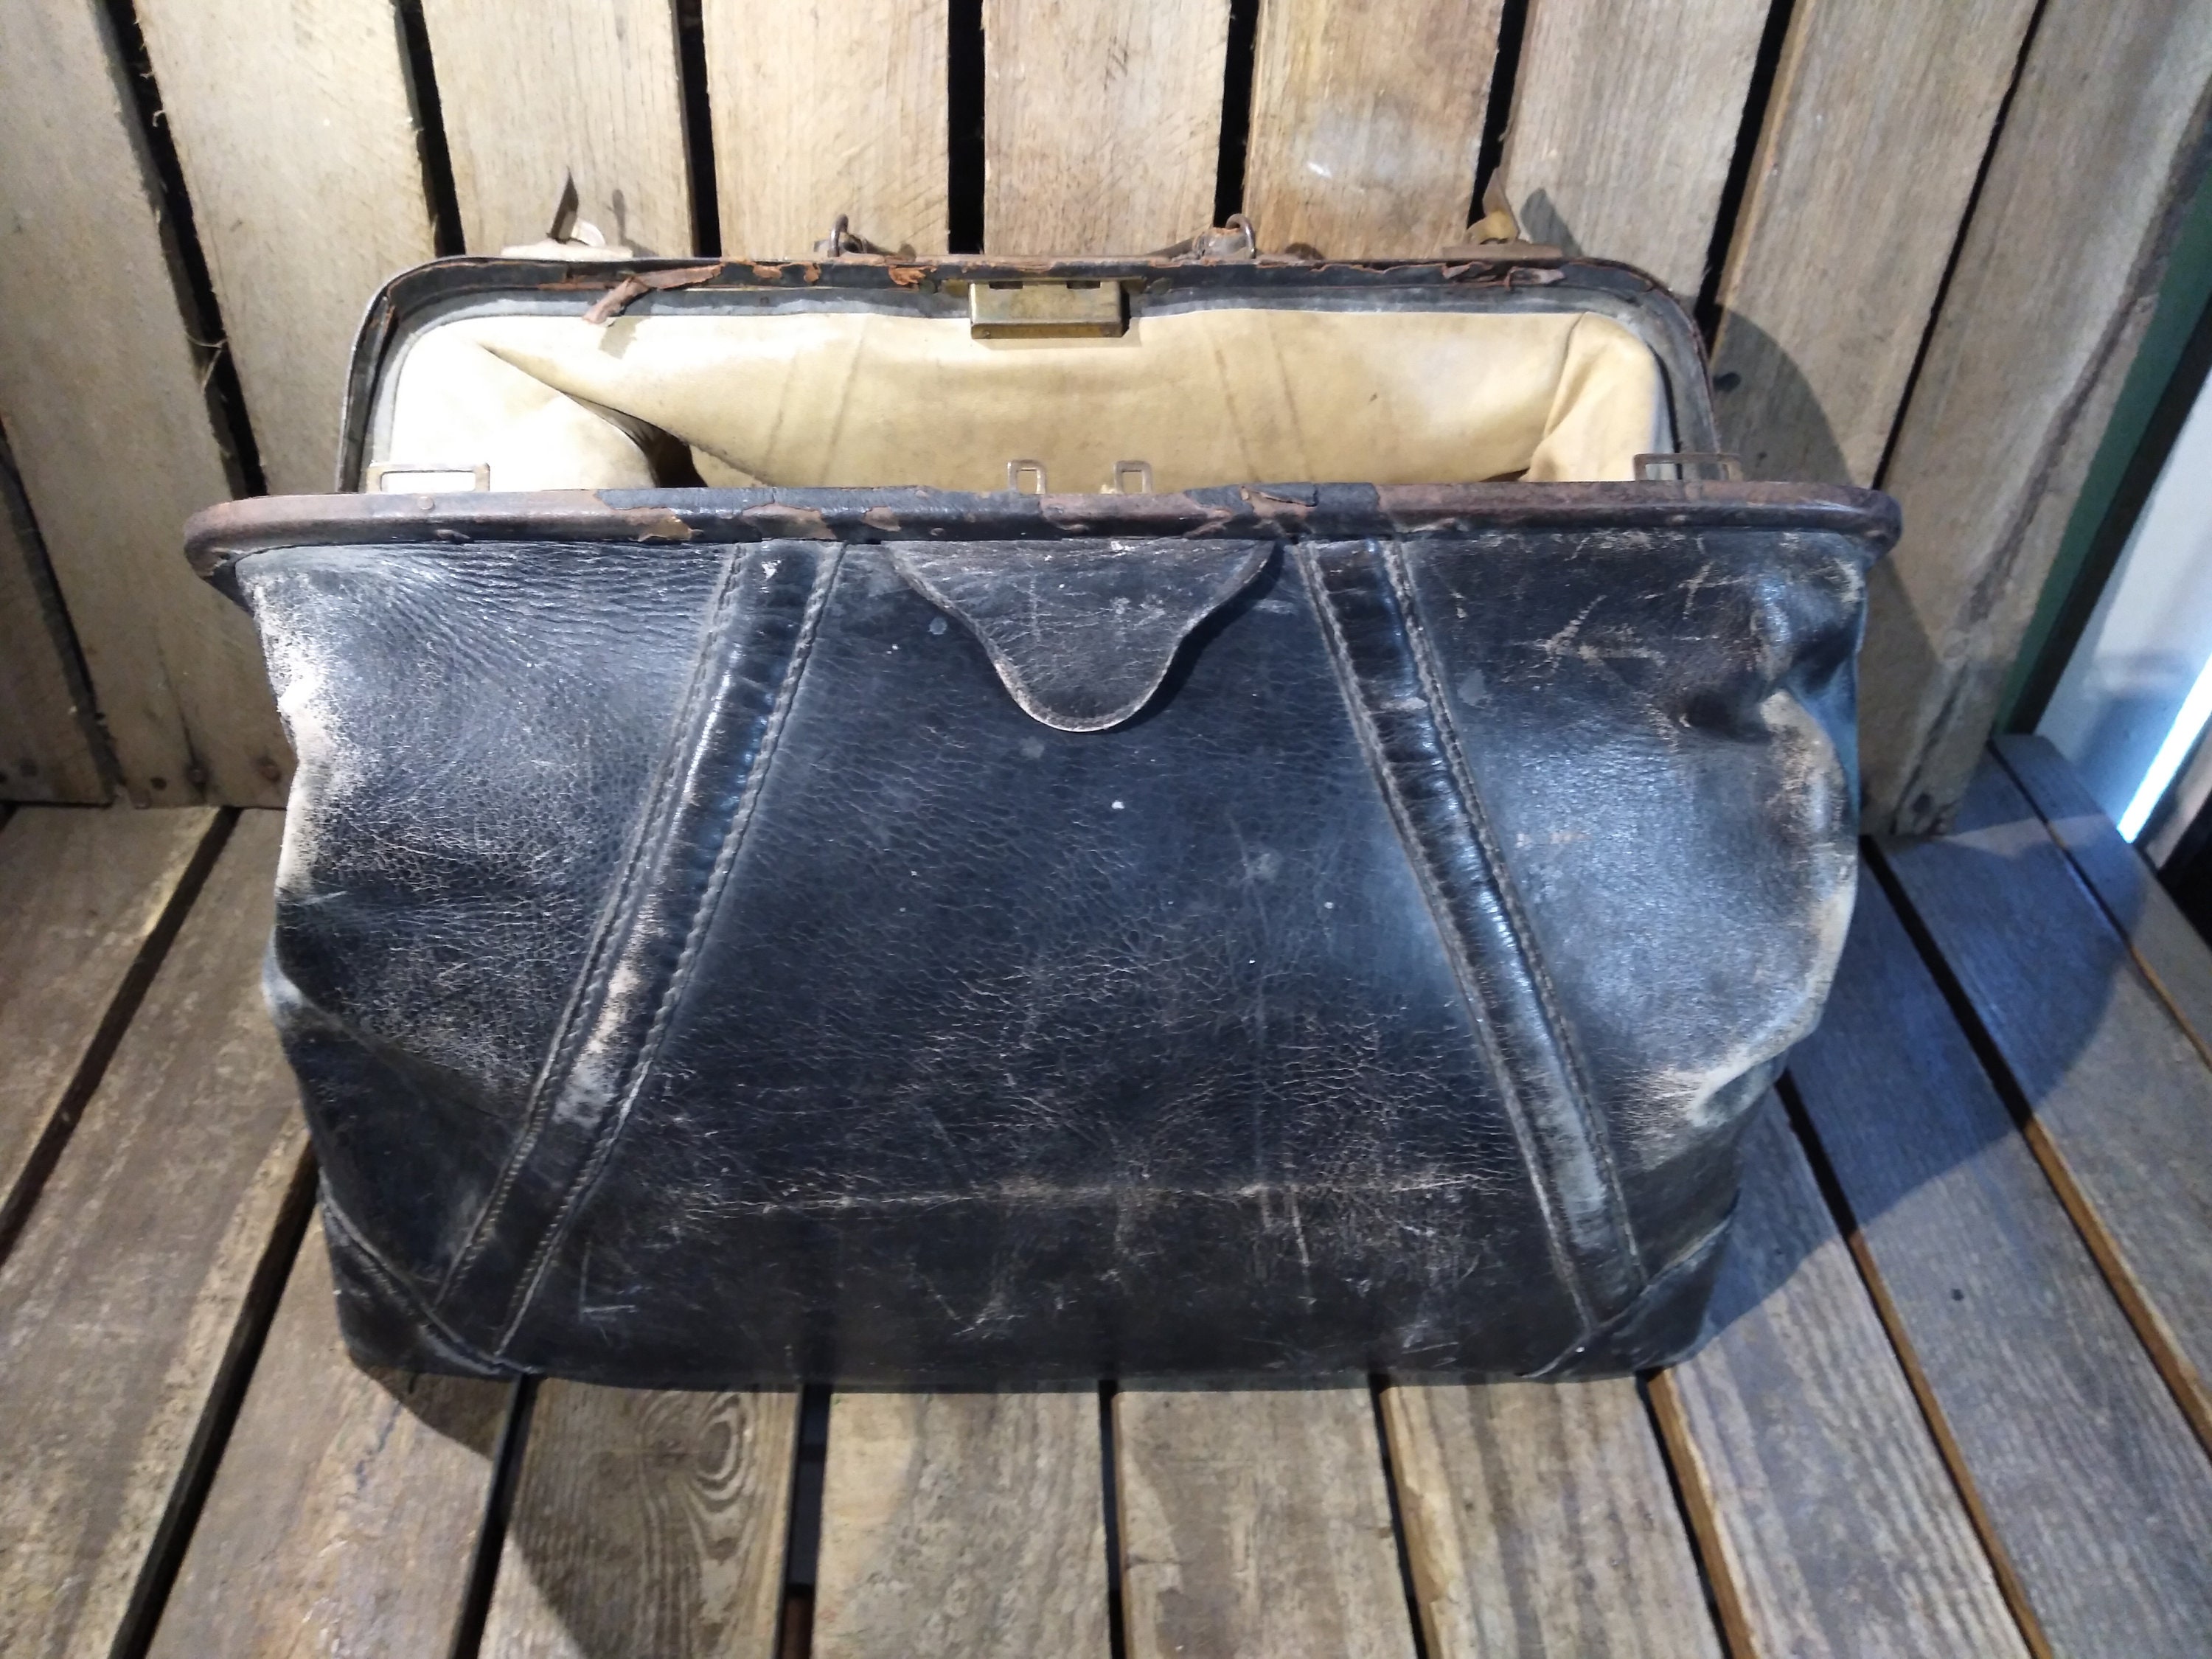 Vintage Doctor's Bag A2926 – Early California Antiques Shop